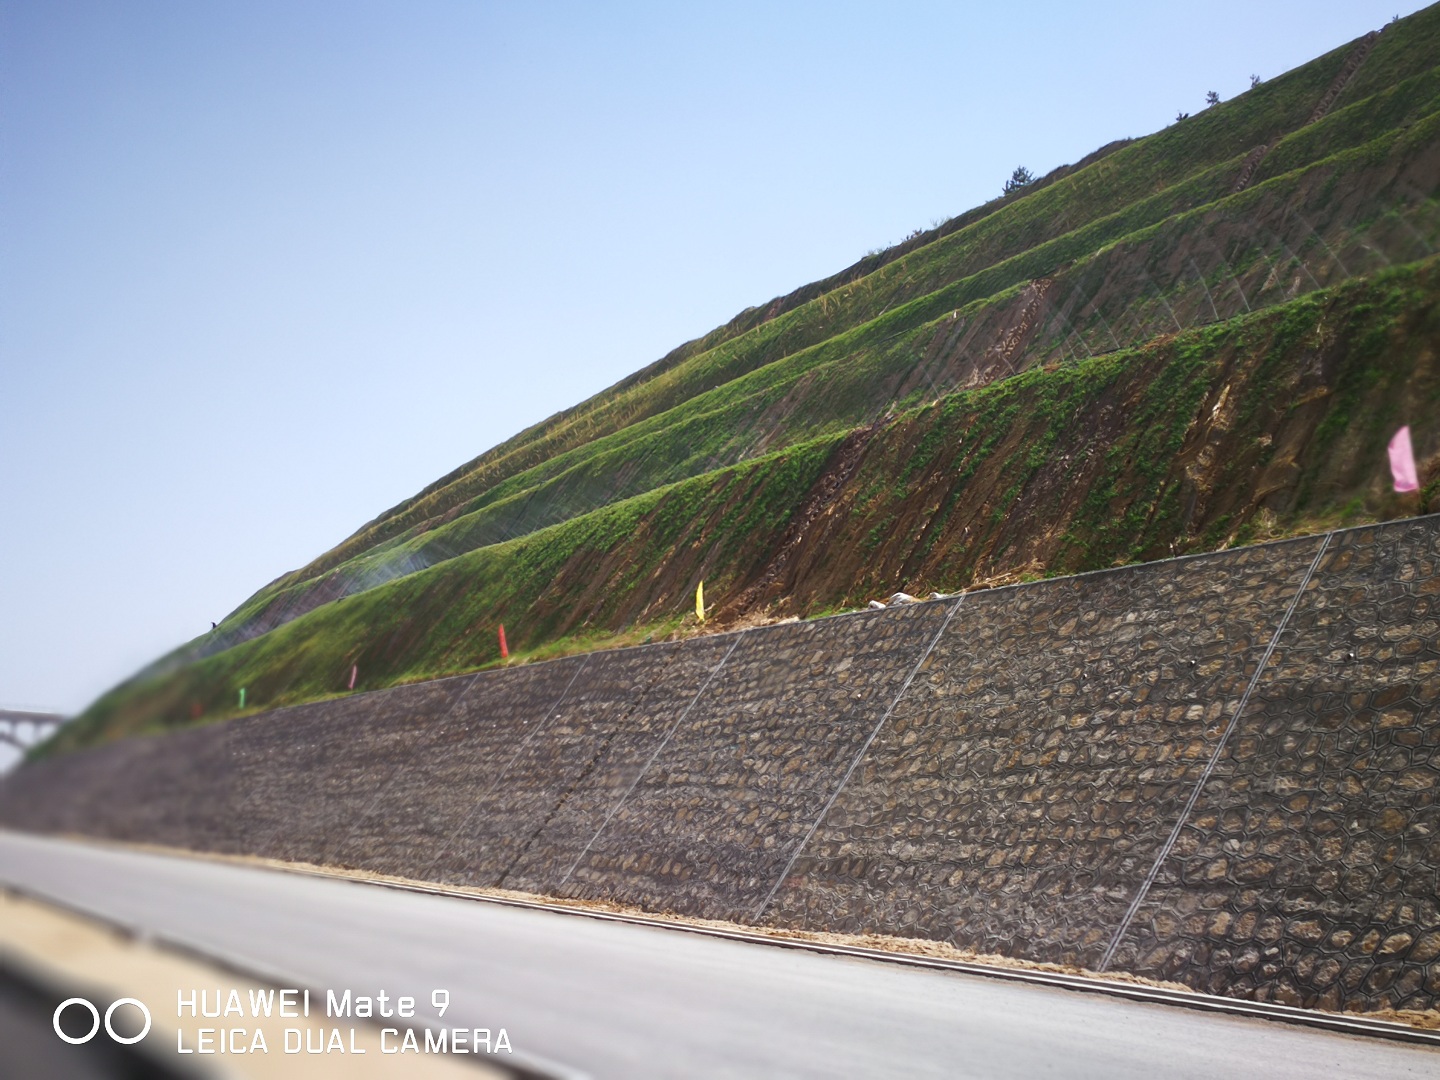 Hydroseeding technology plays a role of afforestation and stabilization for slope